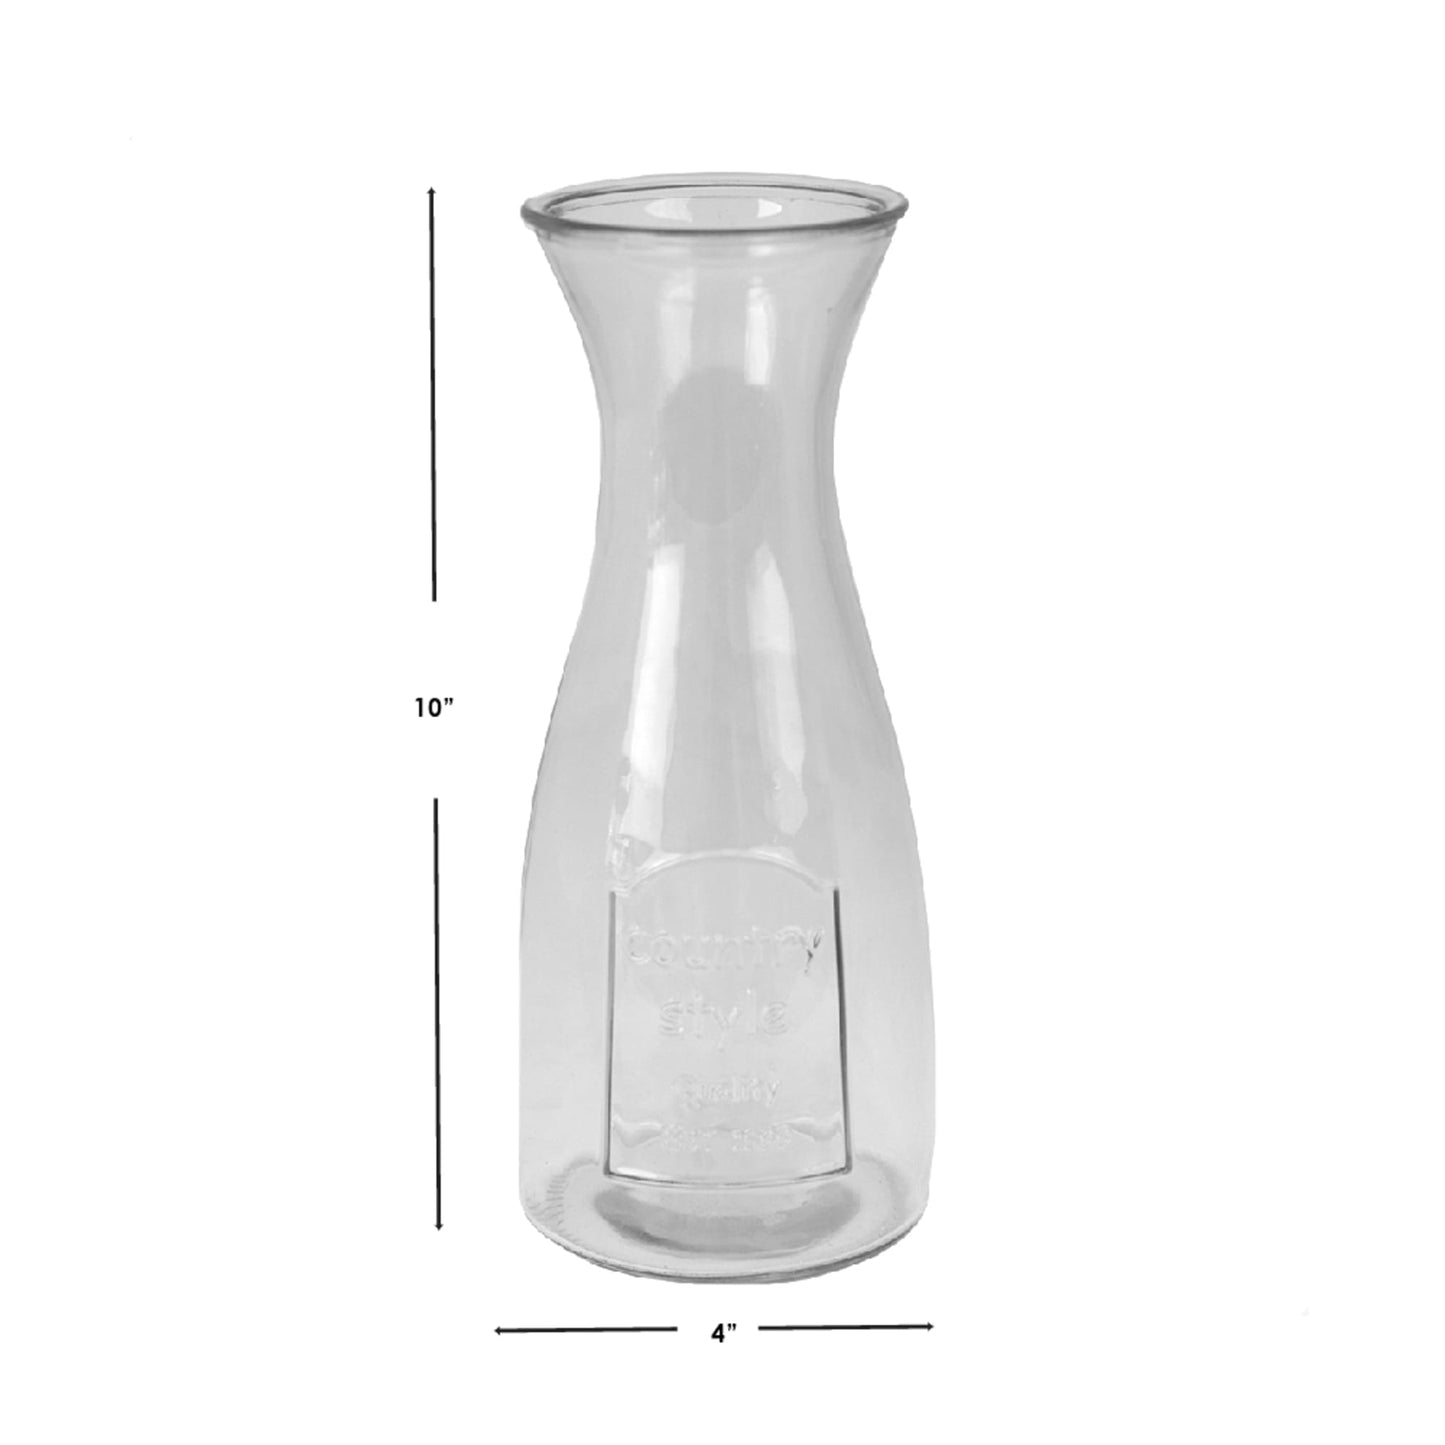 Country Time 33.8 oz Glass  Beverage Carafe Decanter, Clear